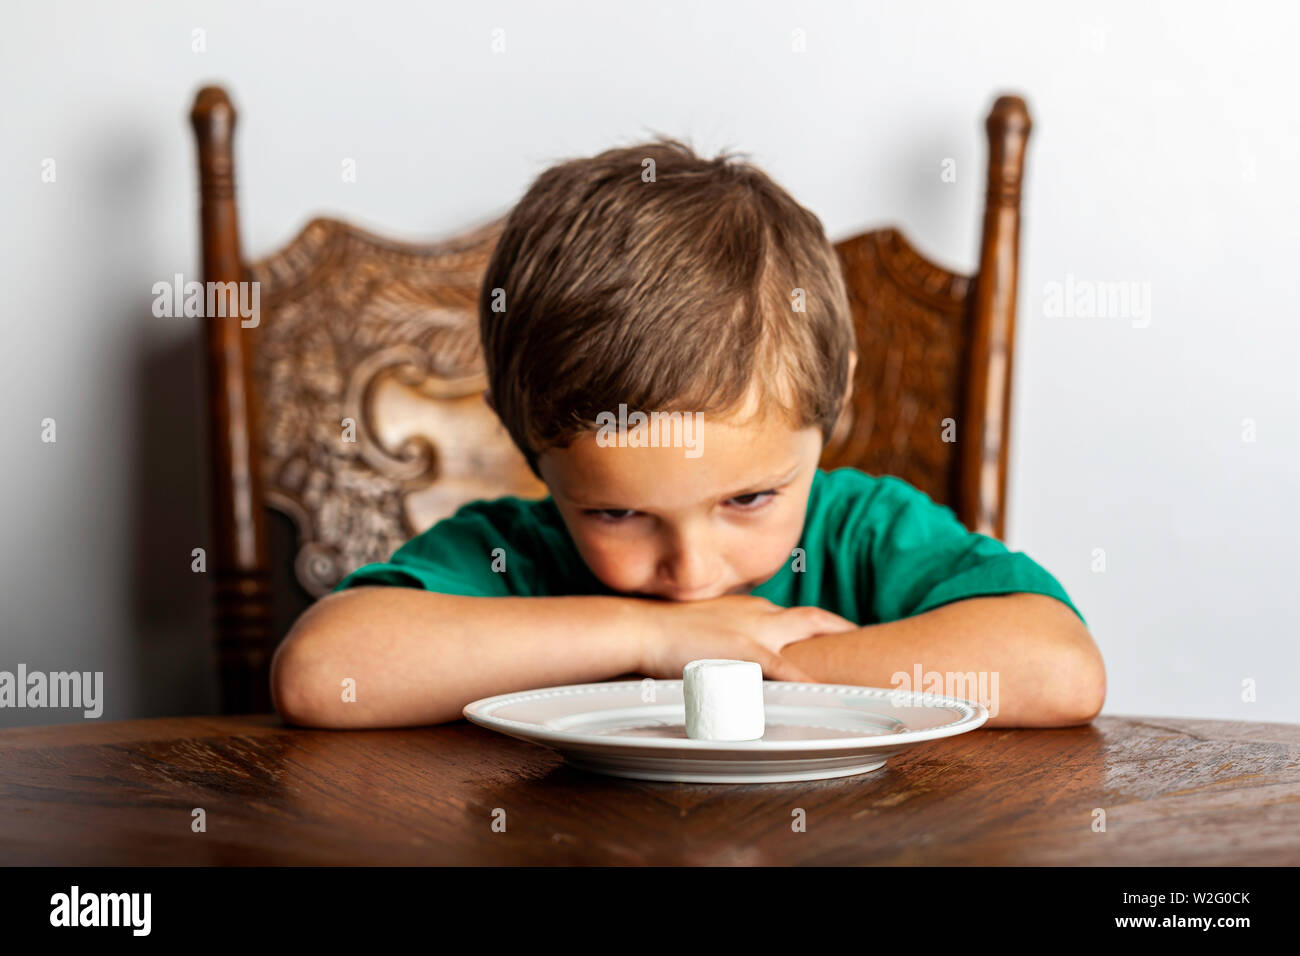 A young boy sitting at a table looking at a single marshmallow close to his face as part of the marshmallow experiment. Stock Photo